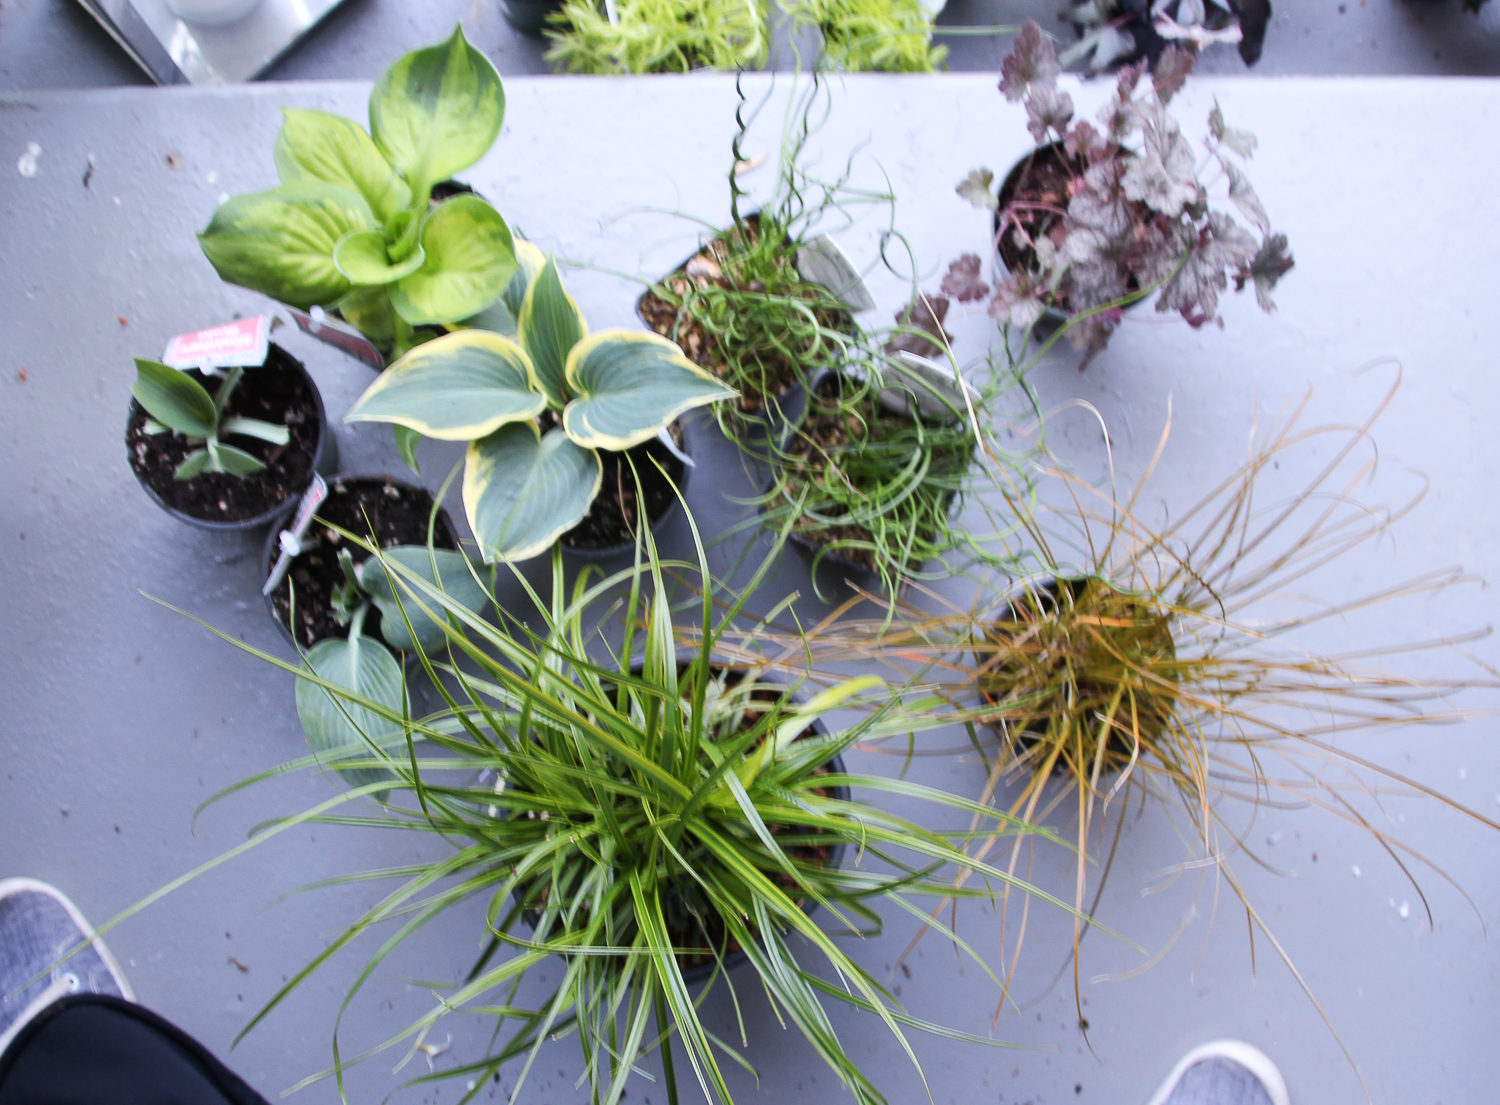 Small plants on the table.